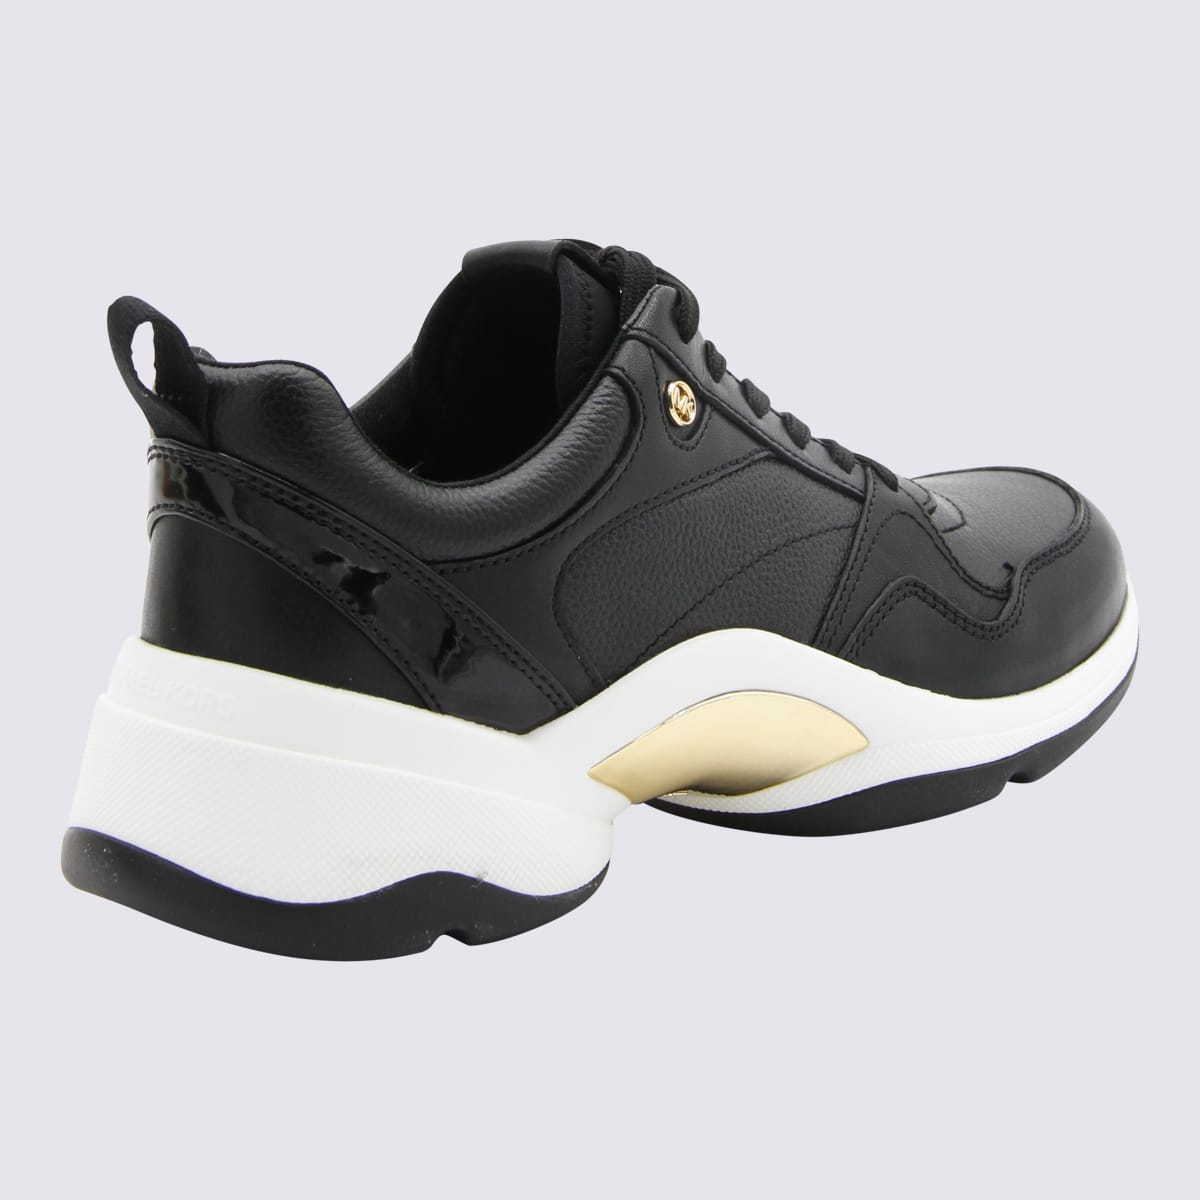 Michael Michael Kors Black Leather Orion Trainer Sneakers